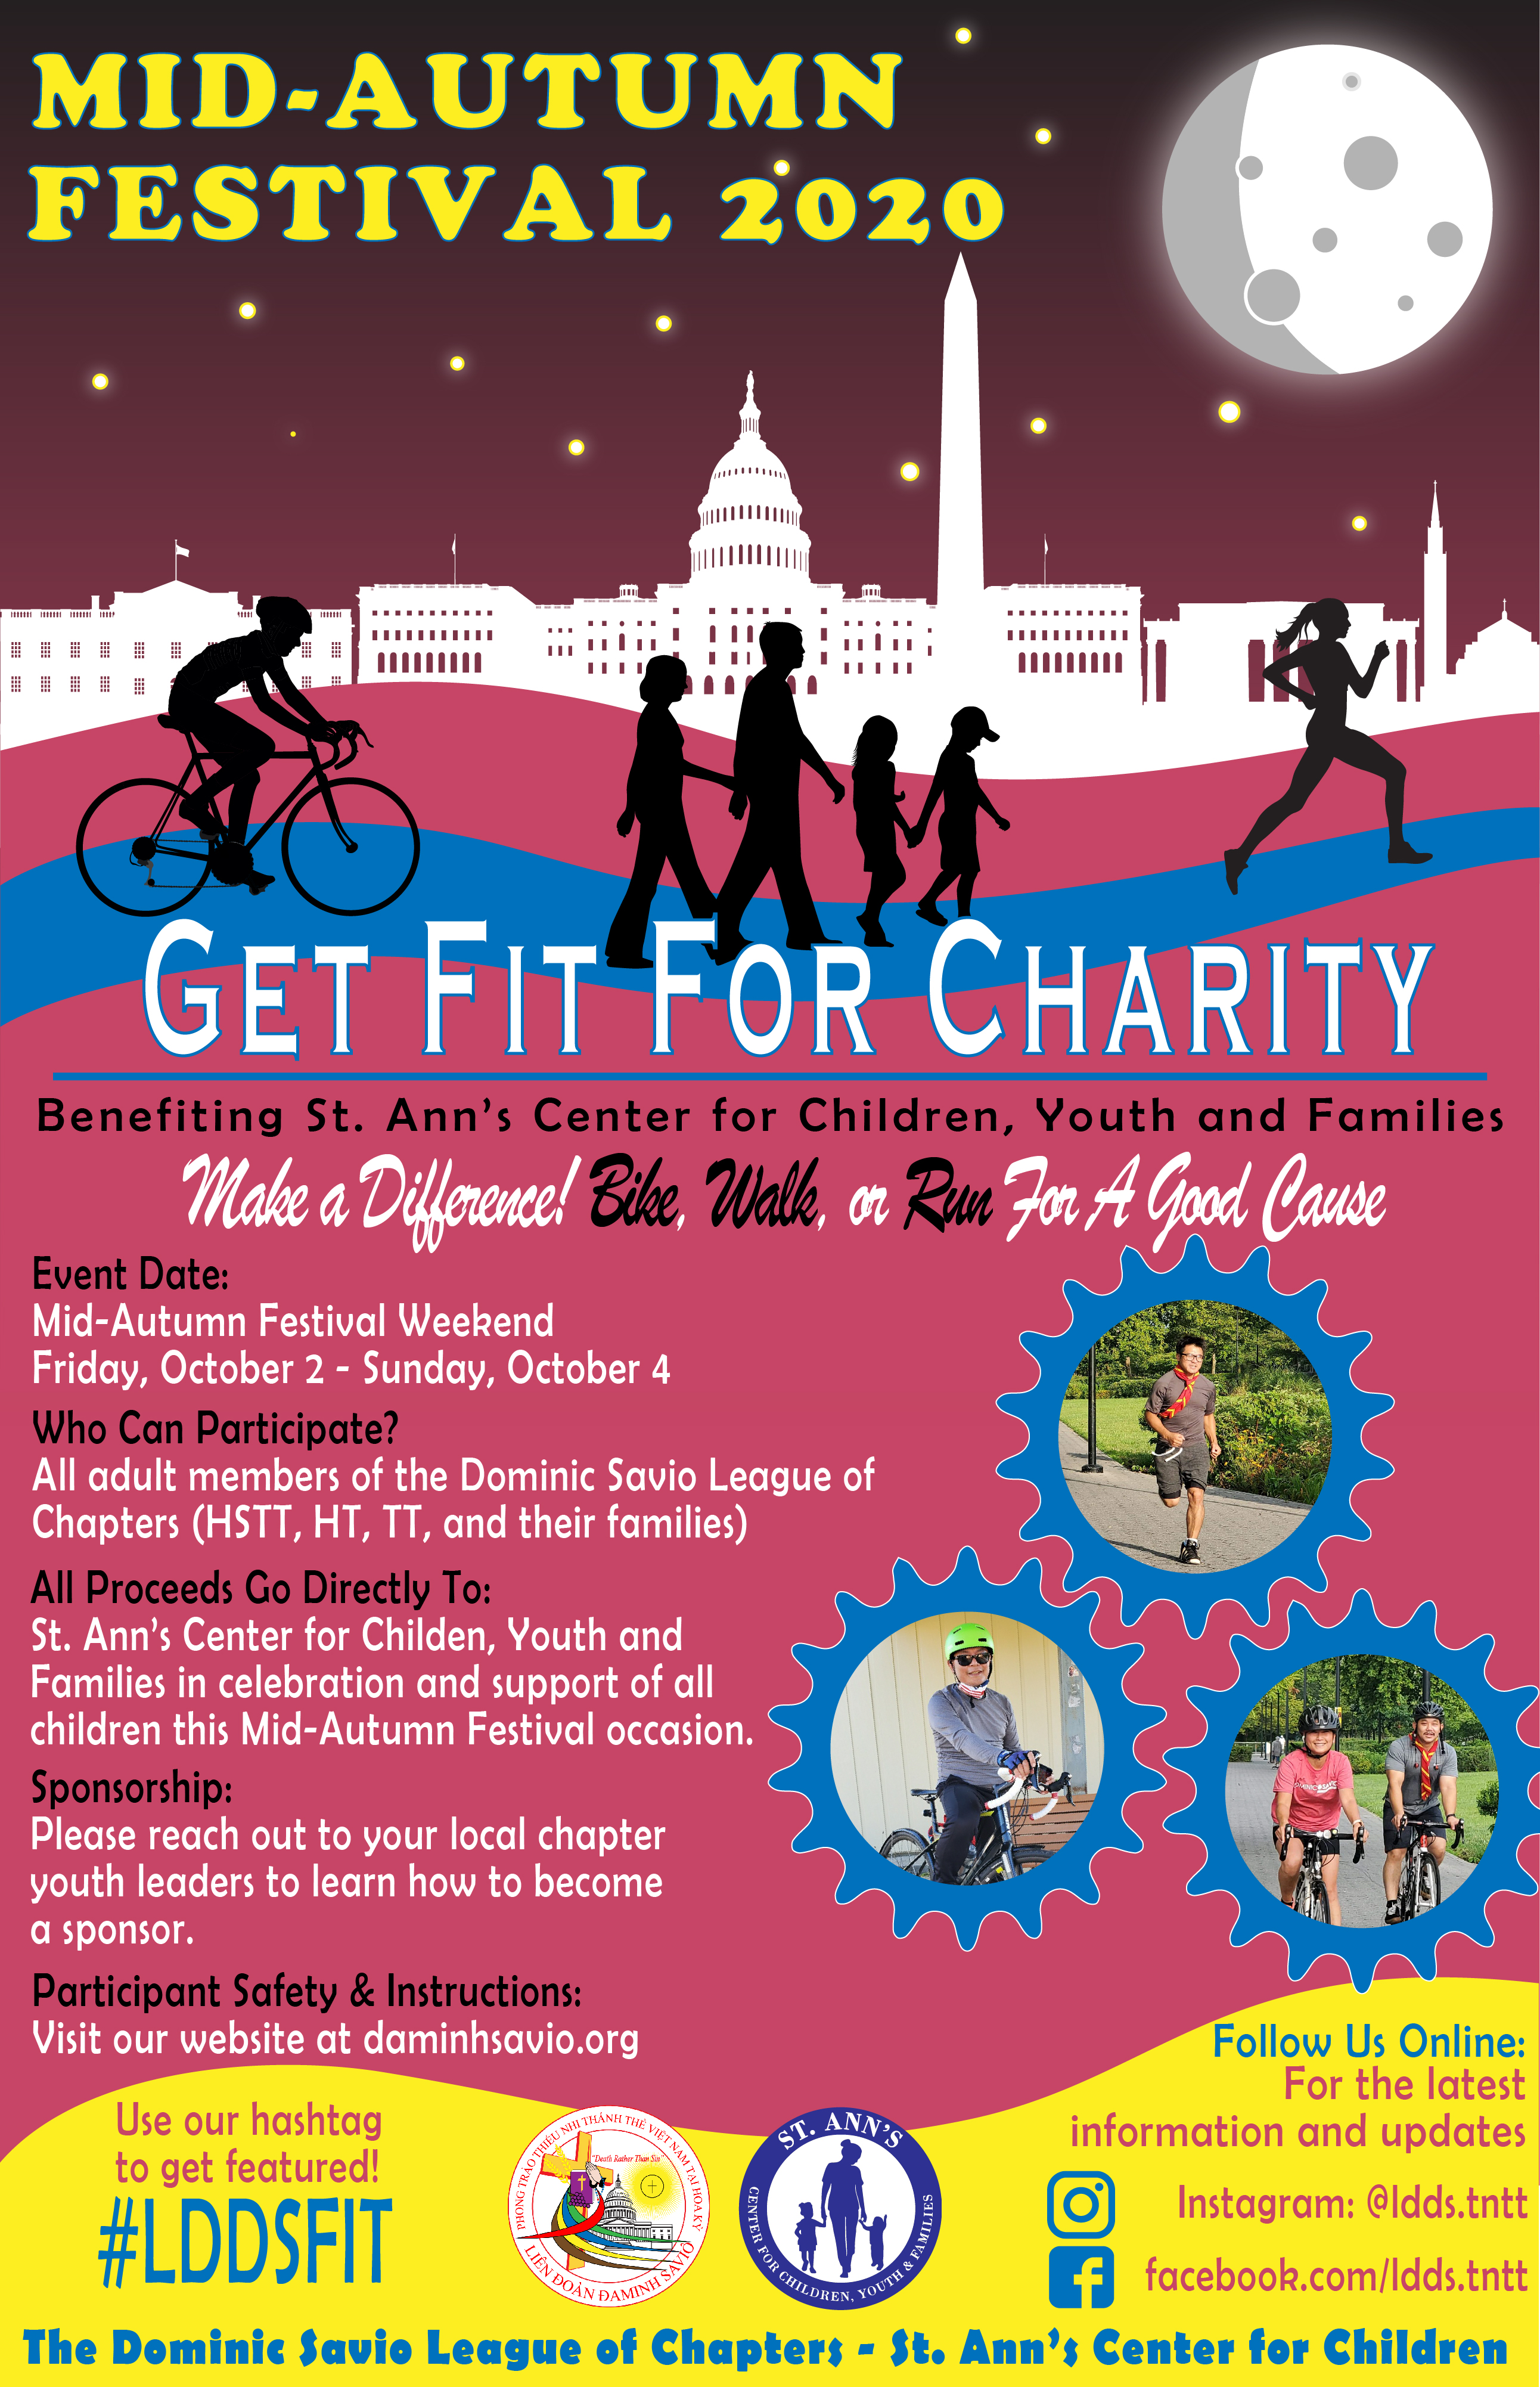 Get Fit for Charity 2020 Announcement